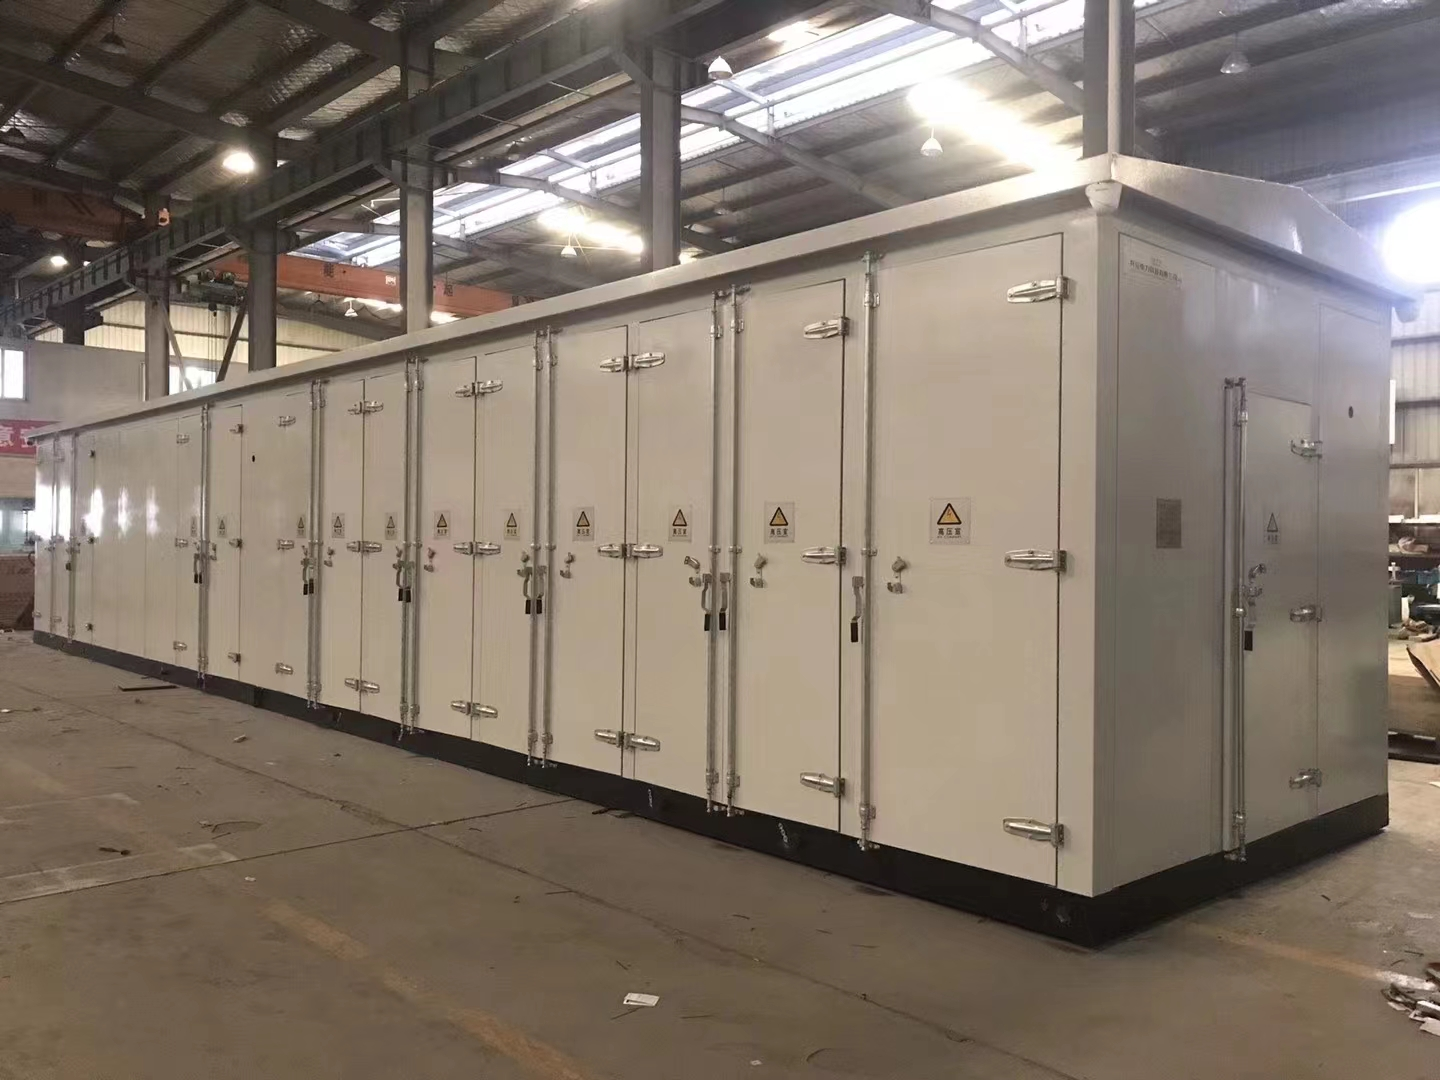 The current status of the application of compact substations